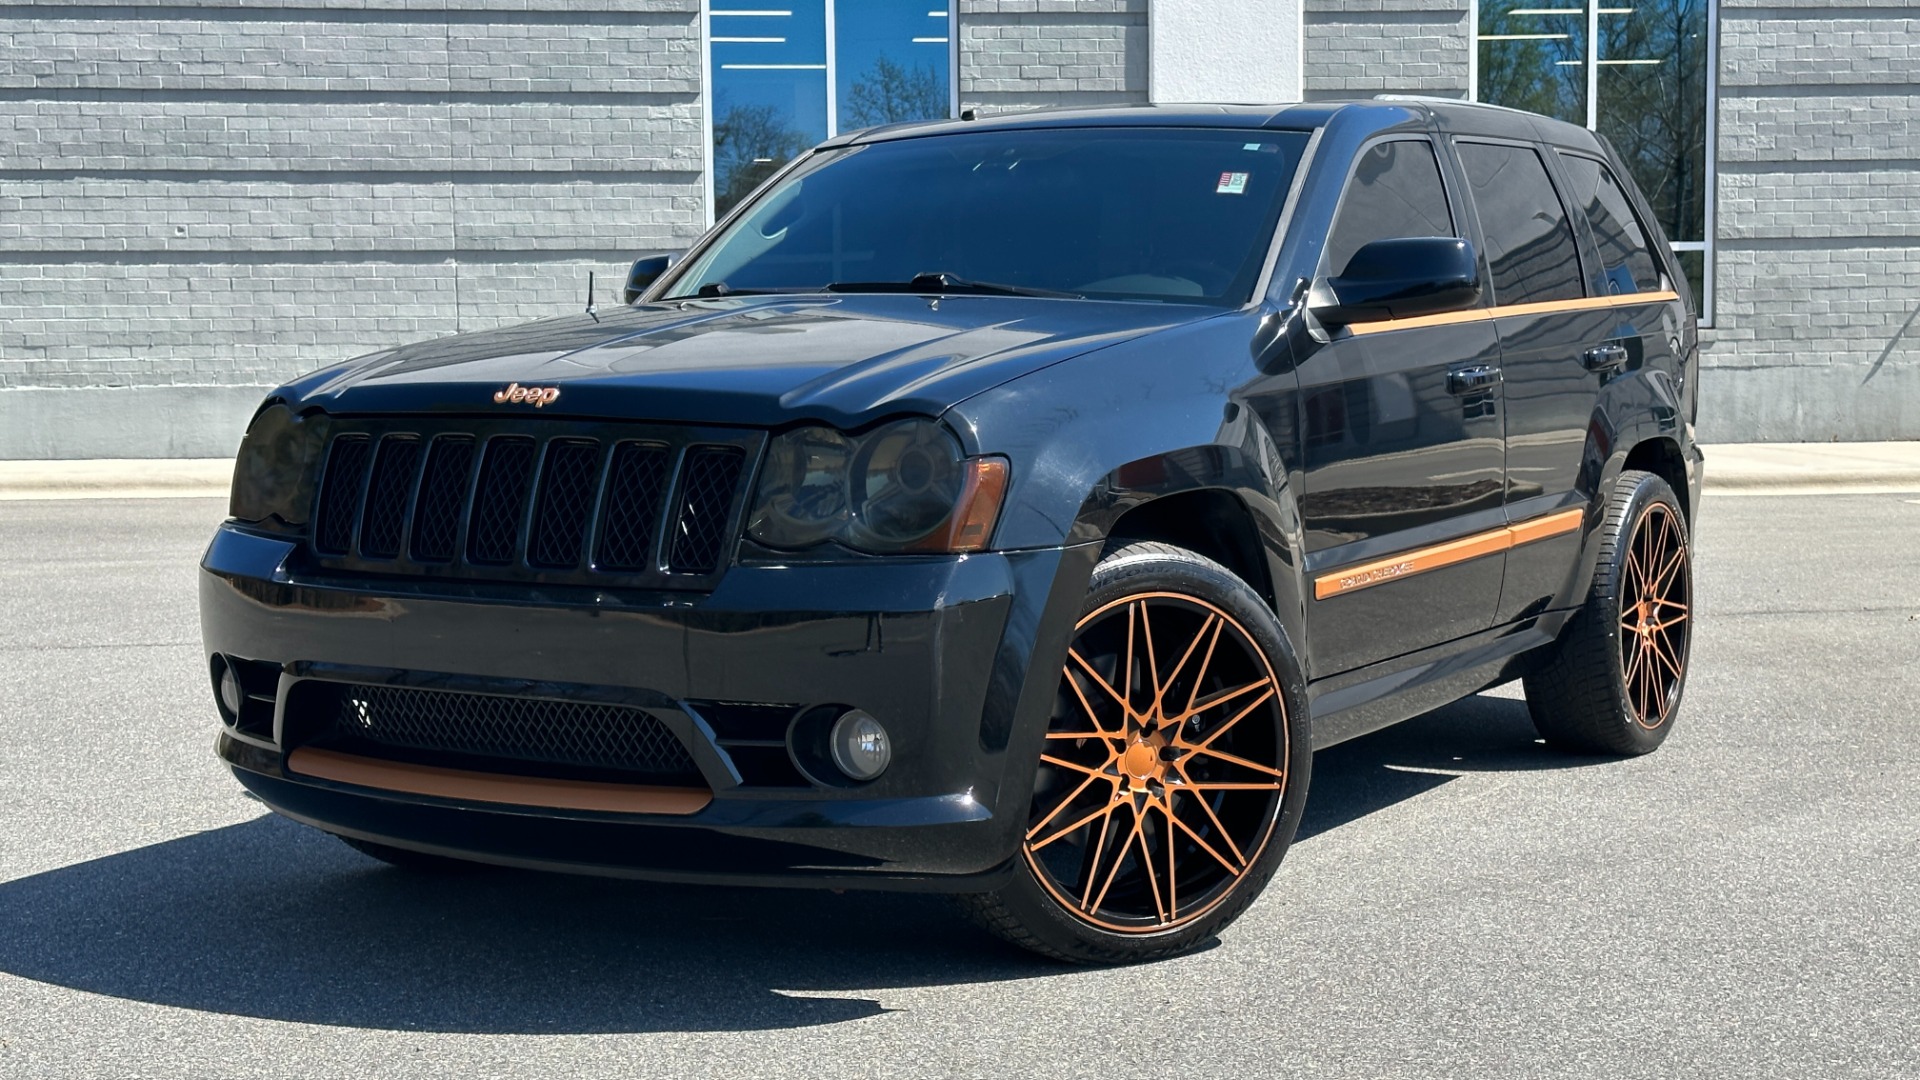 Used 2008 Jeep Grand Cherokee SRT-8 for sale Sold at Formula Imports in Charlotte NC 28227 1